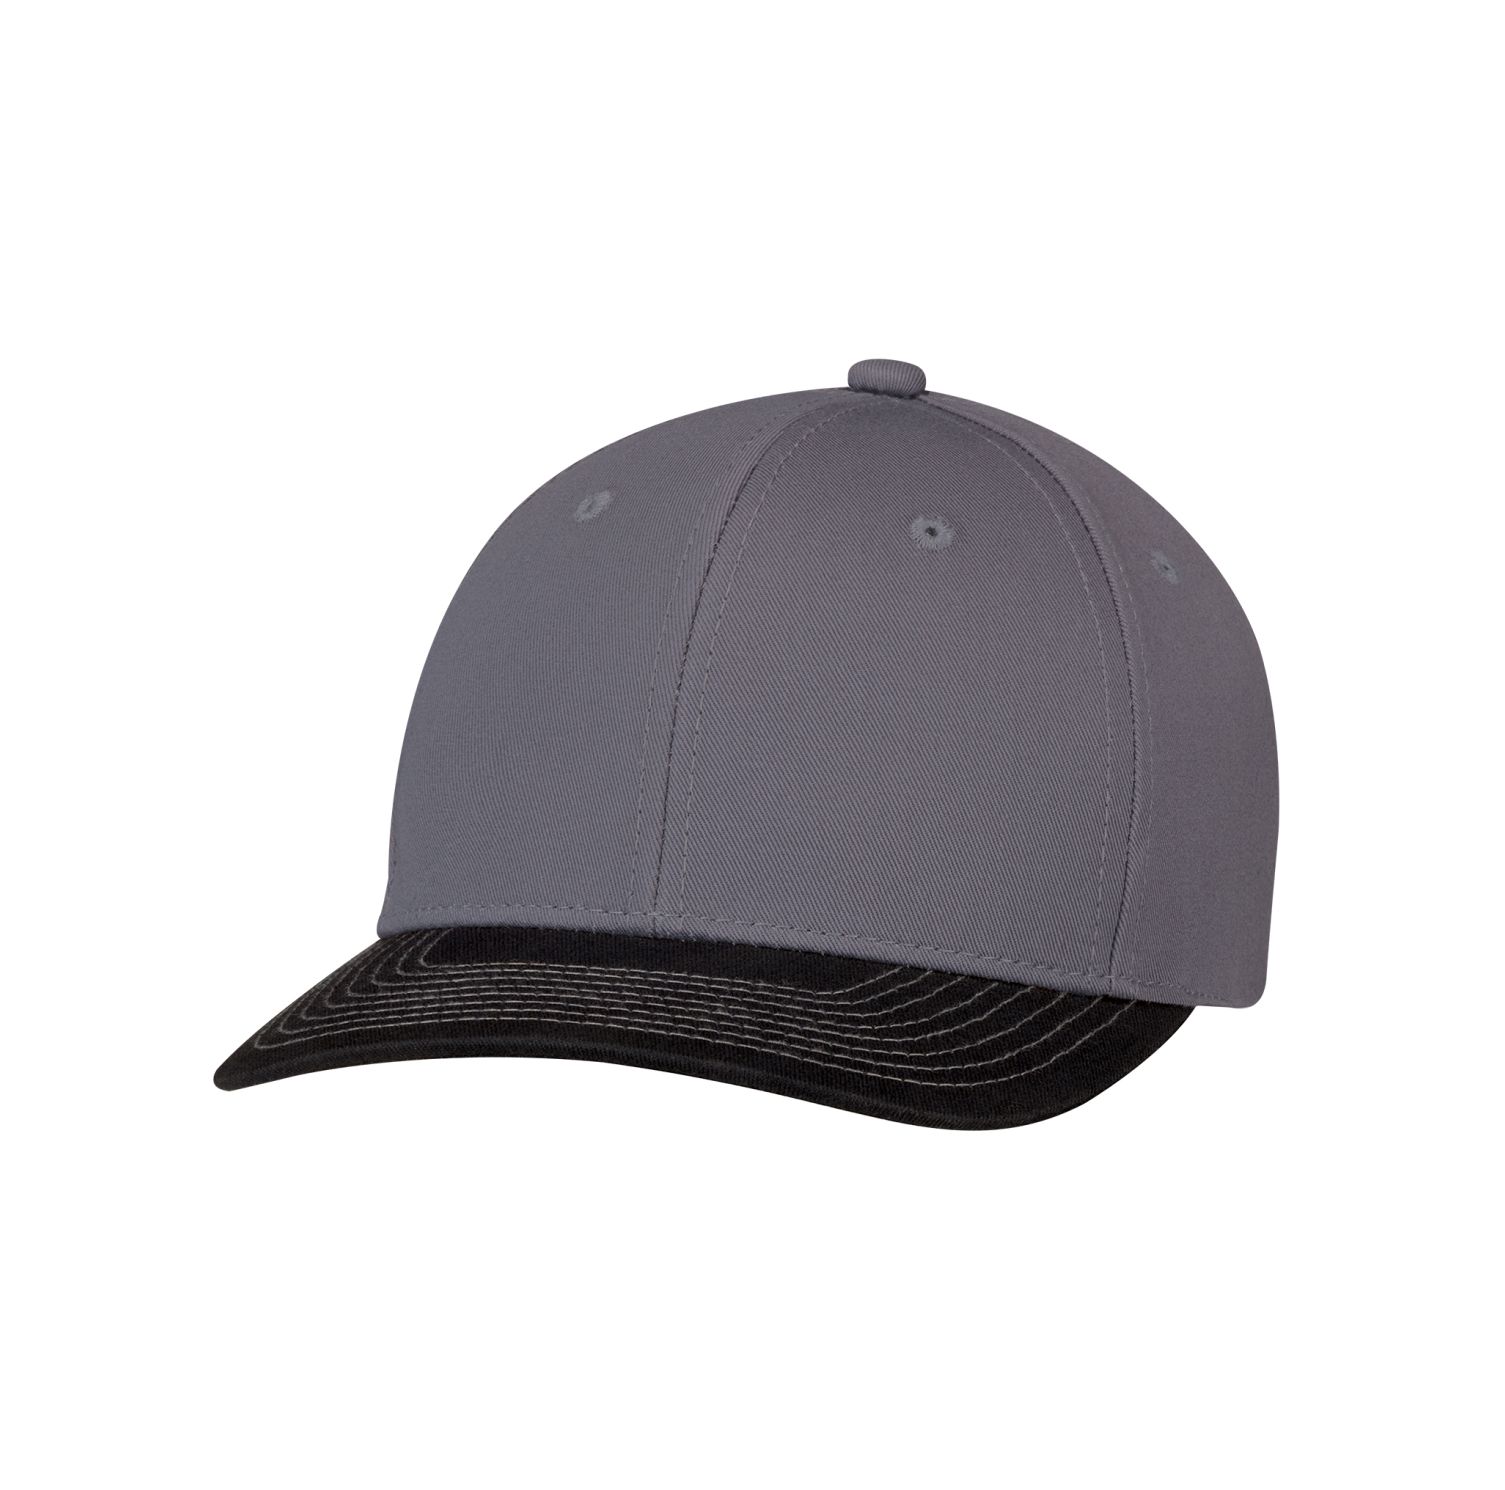 AJM 6-Panel Constructed Pro-Round Hat #8F010M Black / Charcoal / Charcoal